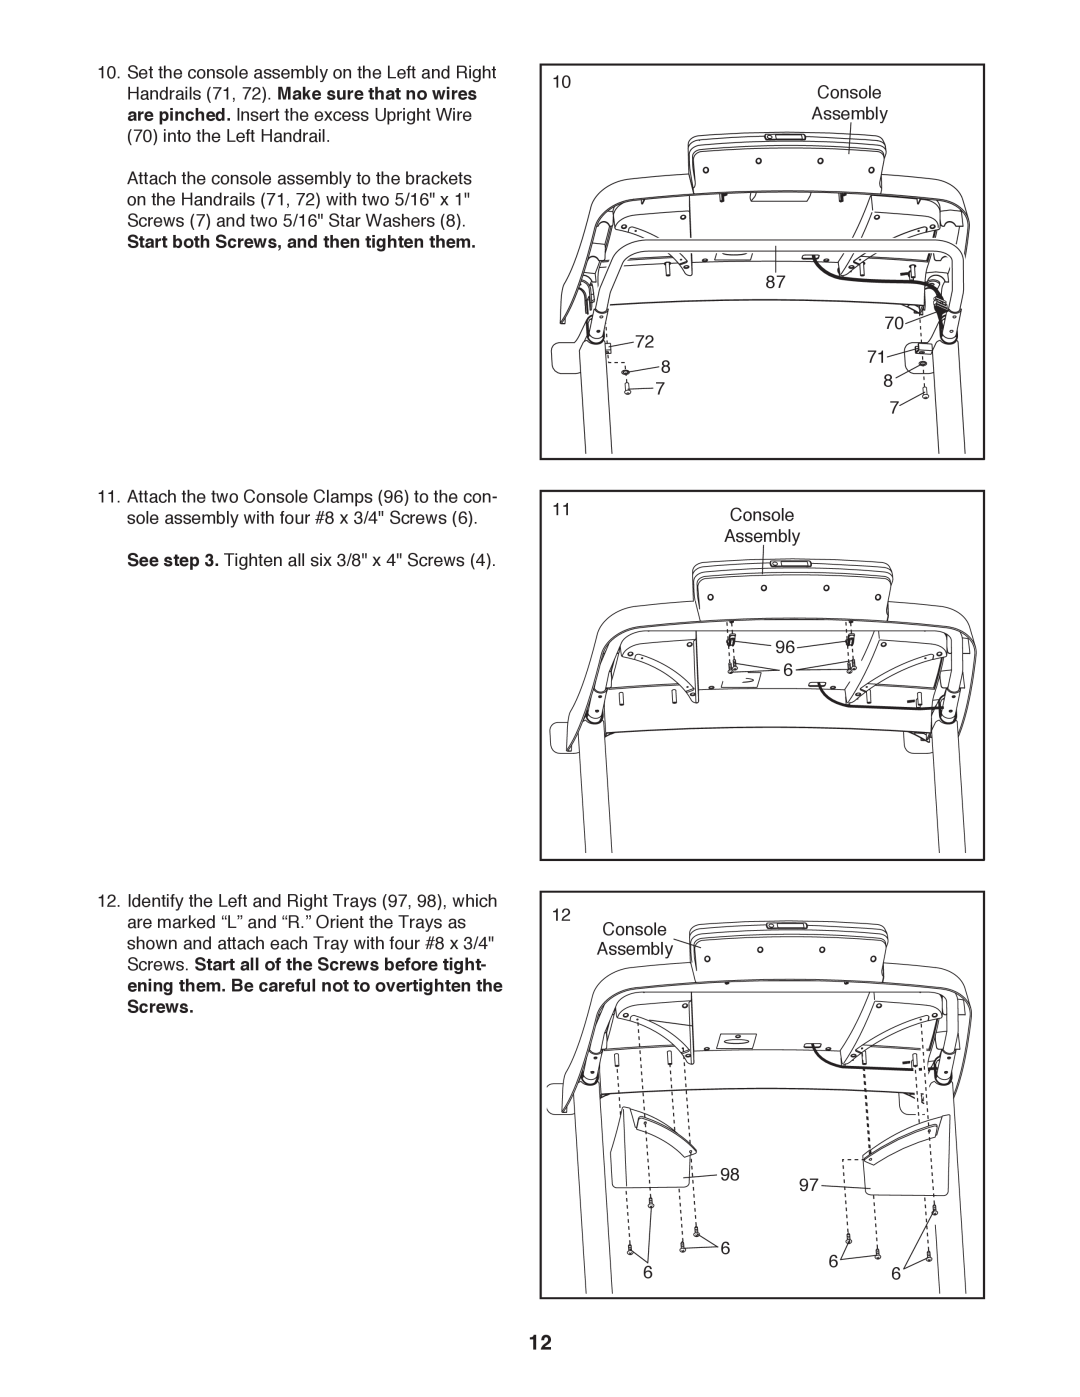 Sears NTL61011.1 user manual Handrails 71, 72. Make sure that no wires, Start both Screws, and then tighten them 